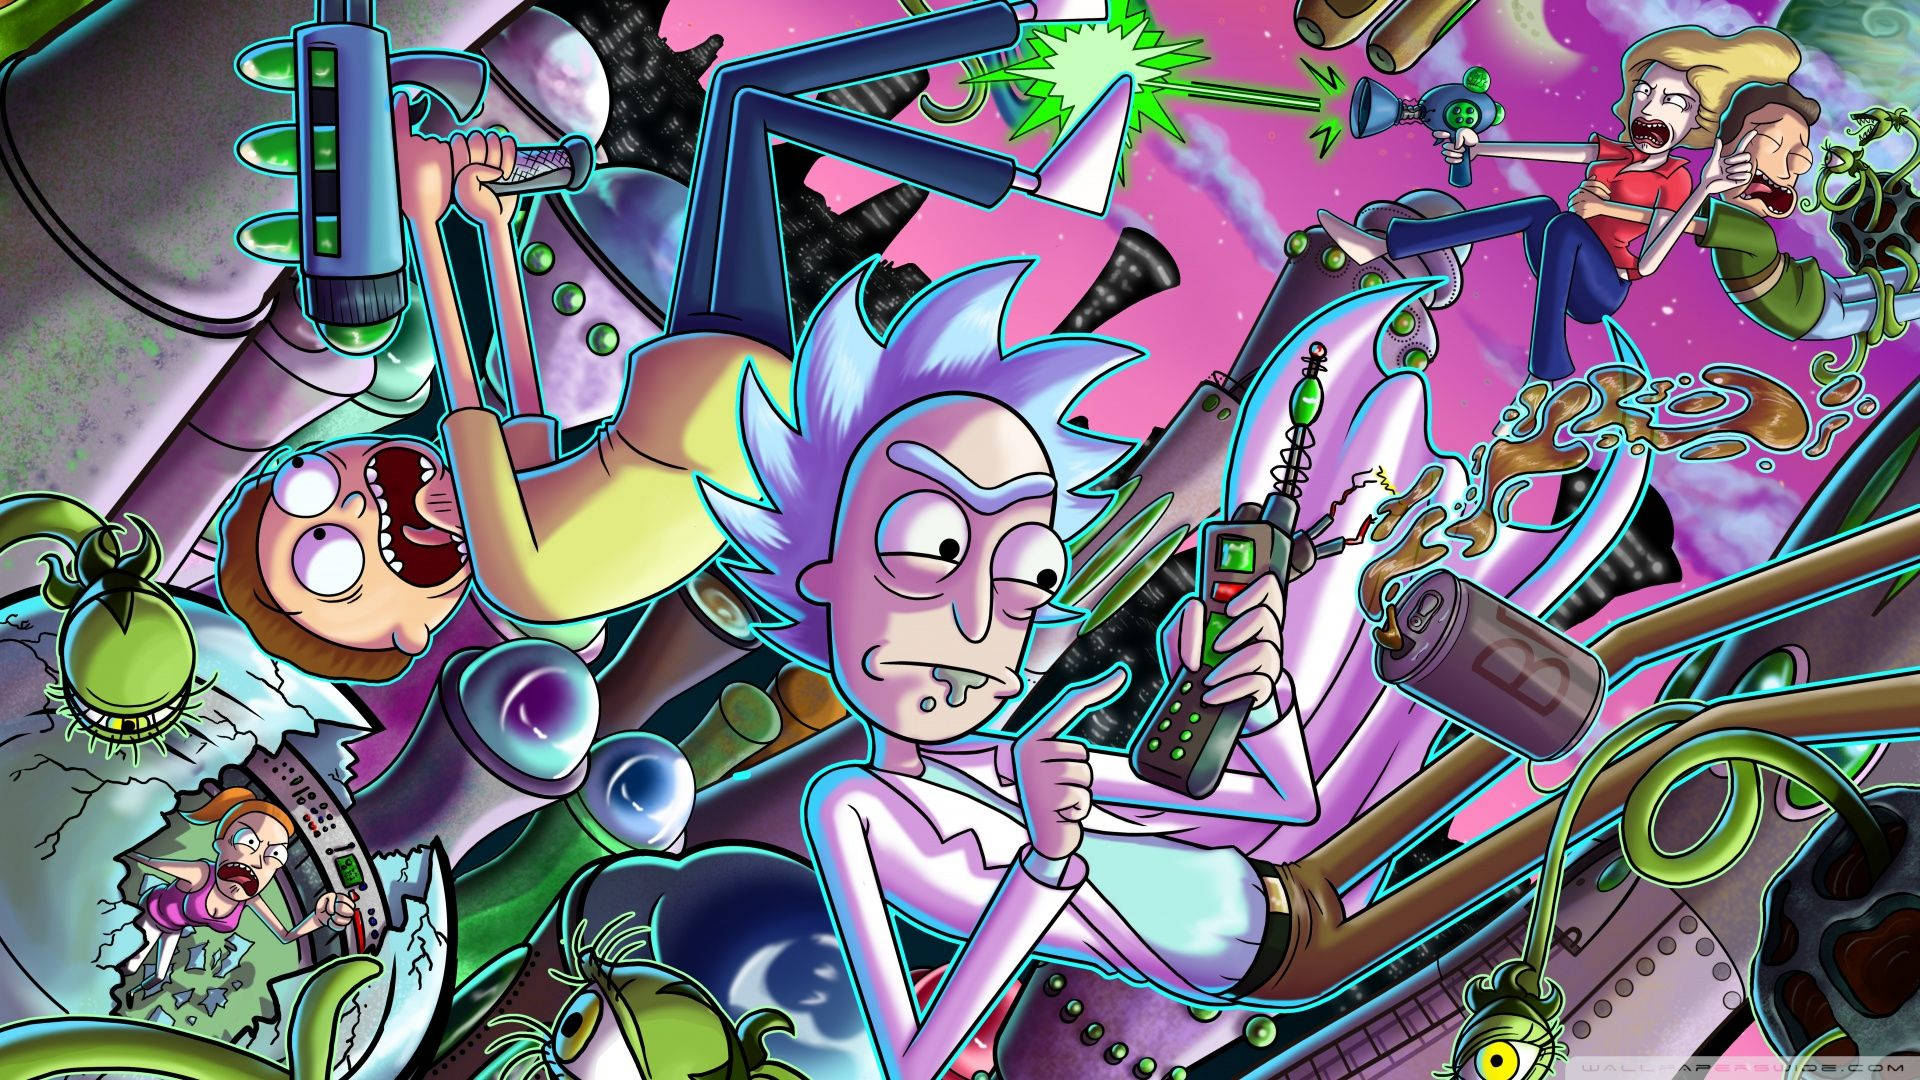 Download Rick And Morty Stoner Falling Amidst Chaos Wallpaper